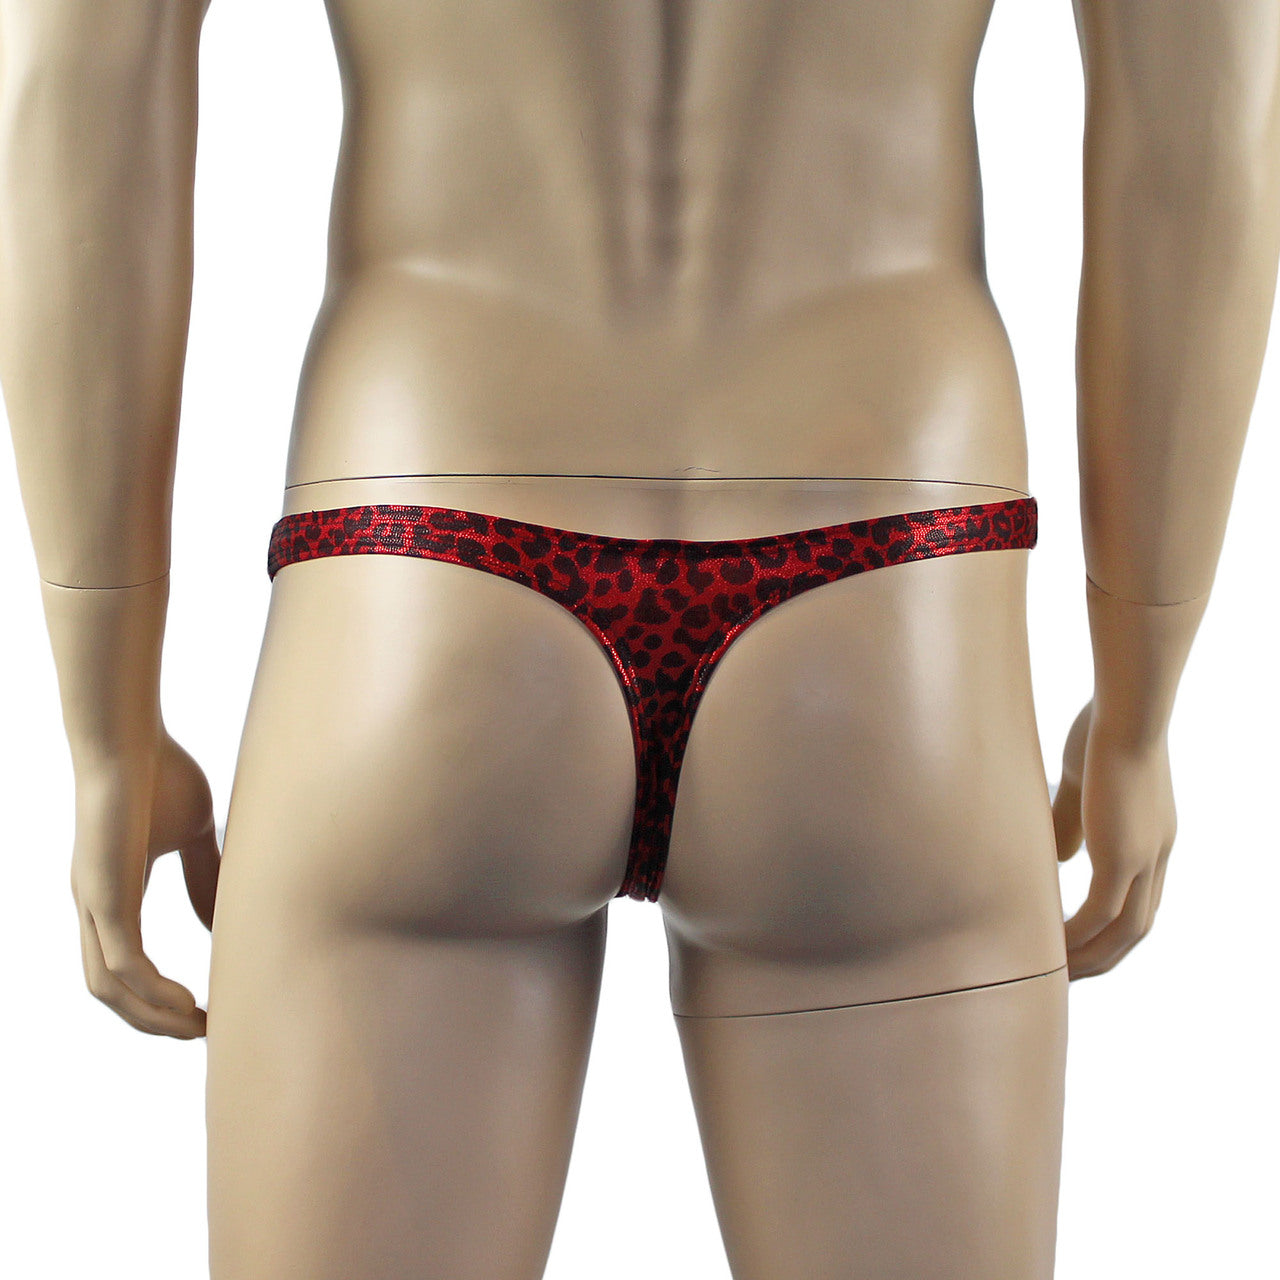 Mens Dazzle Animal Leopard Print Bra Top Camisole and Thong Set Red